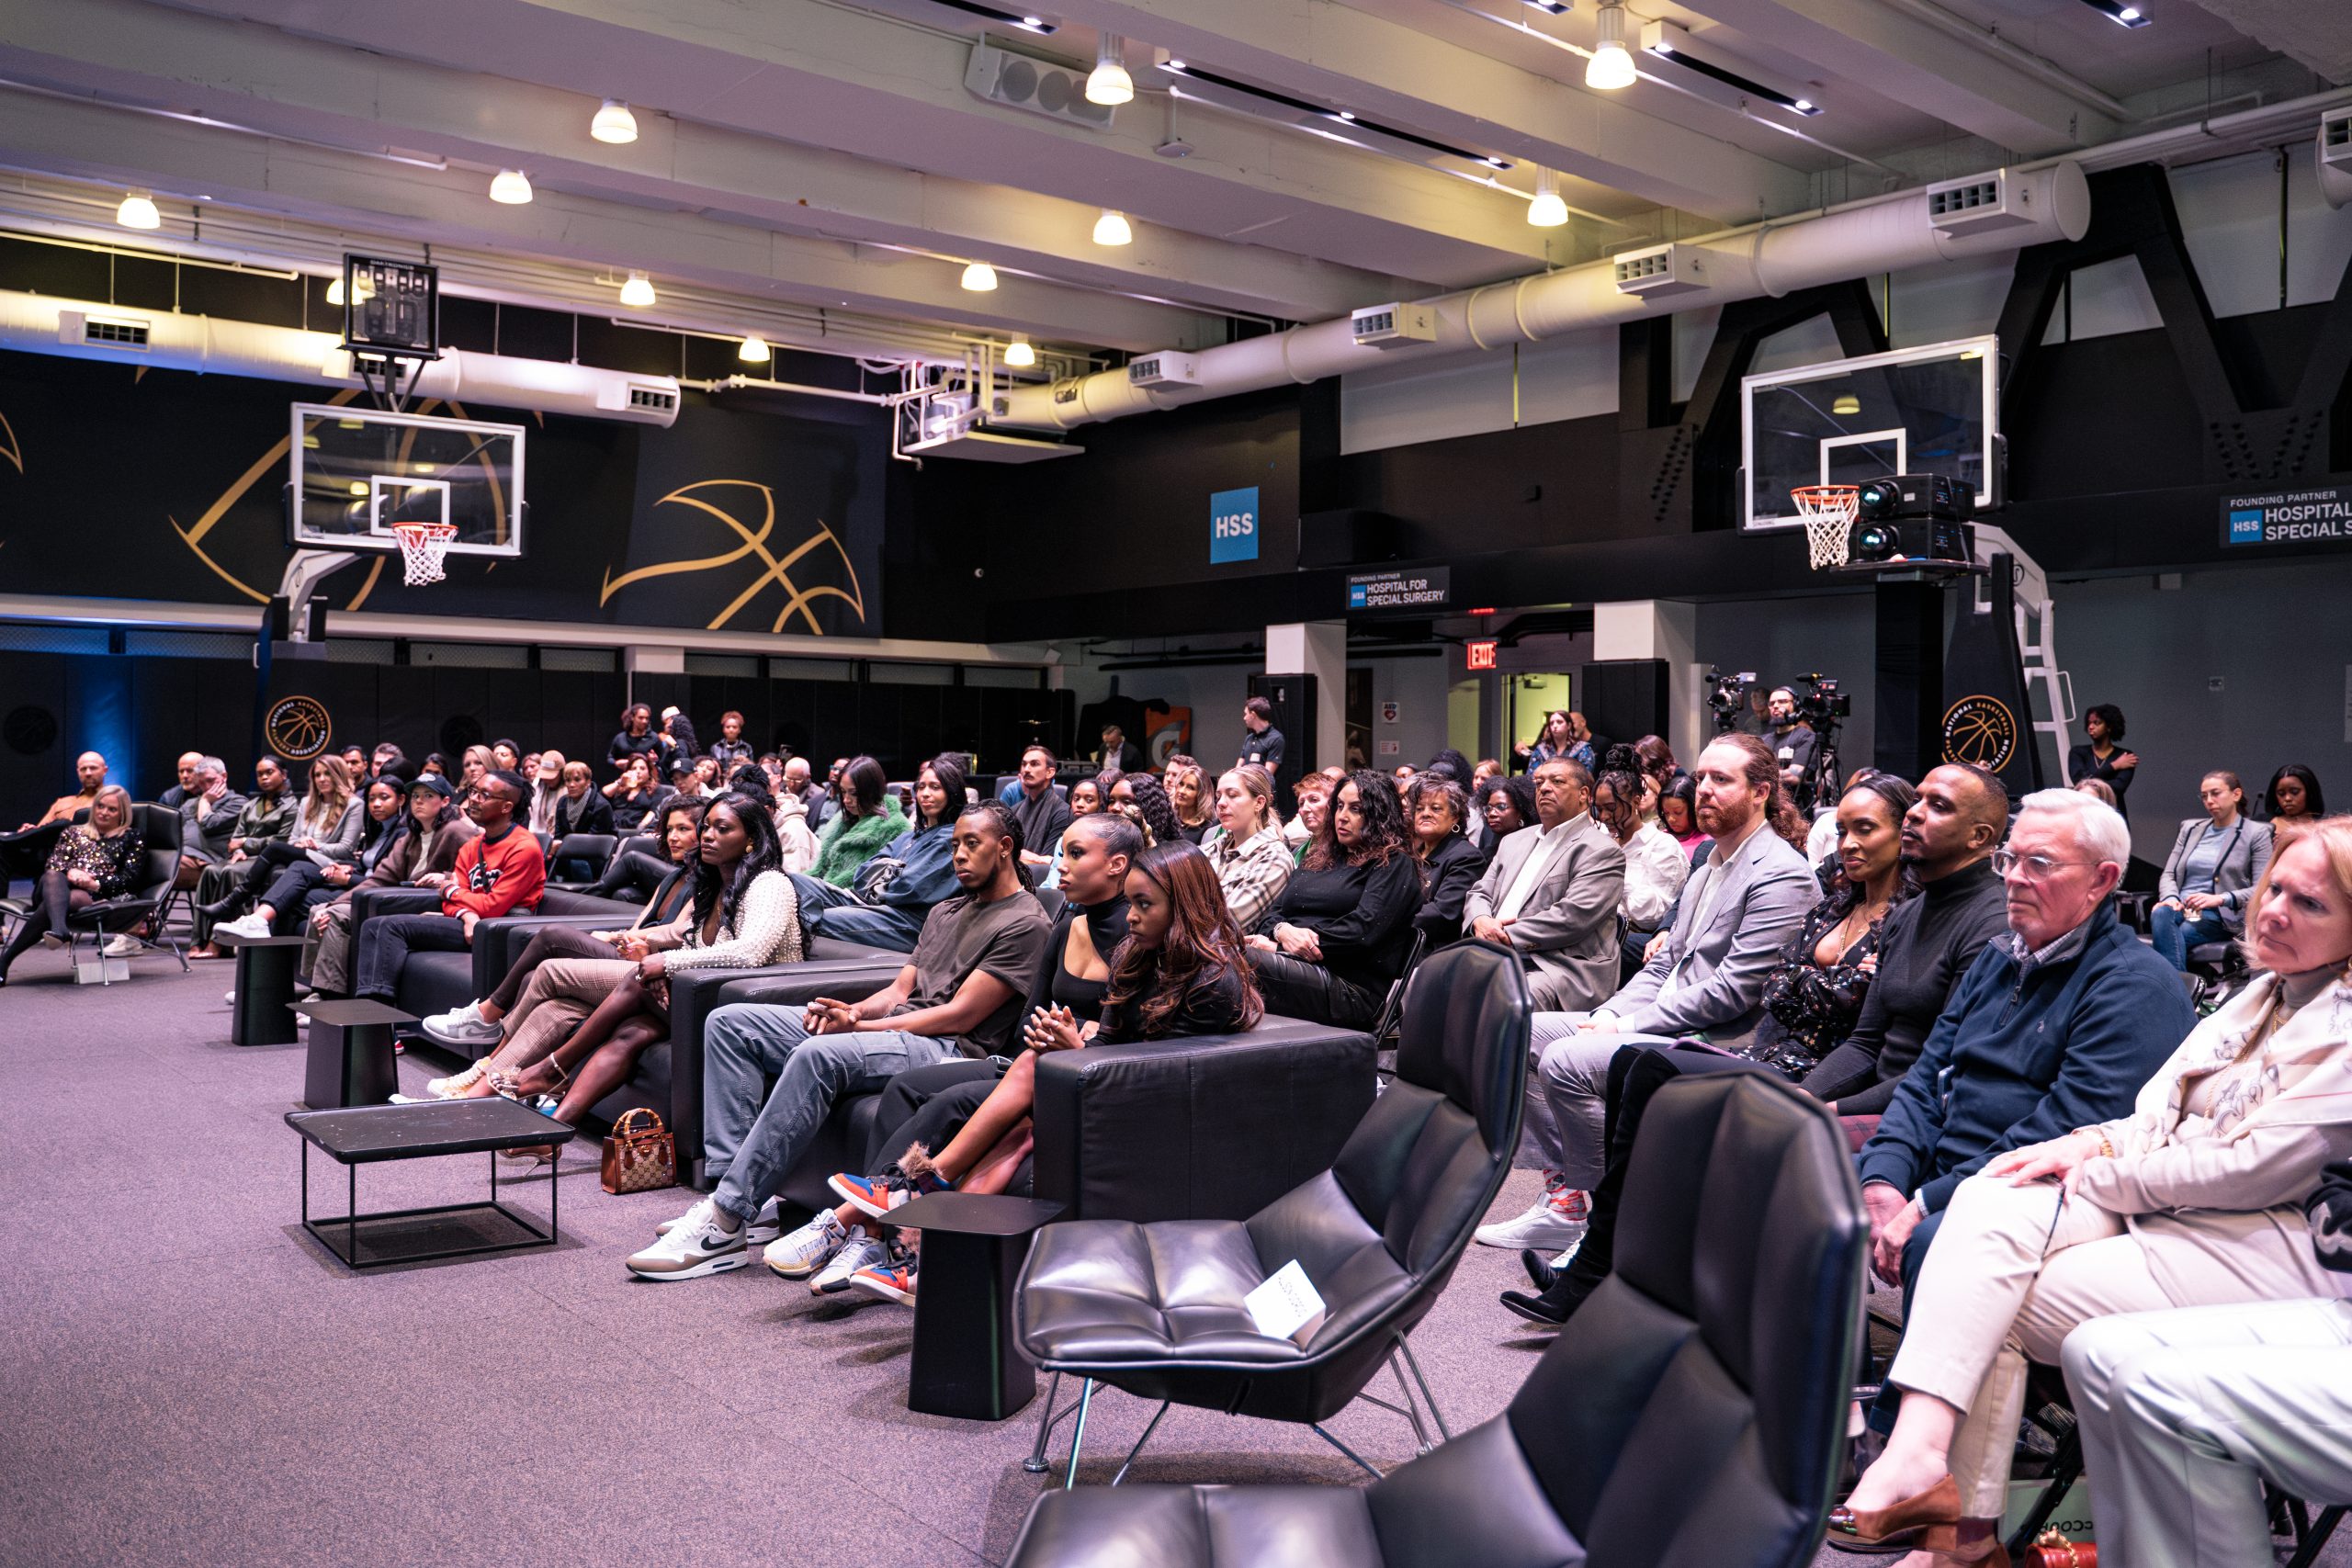 Shattered Glass: A WNBPA Story premiere at the WNBPA Headquarters in New York City/(Photo Credit: WNBPA/Chris Samson)